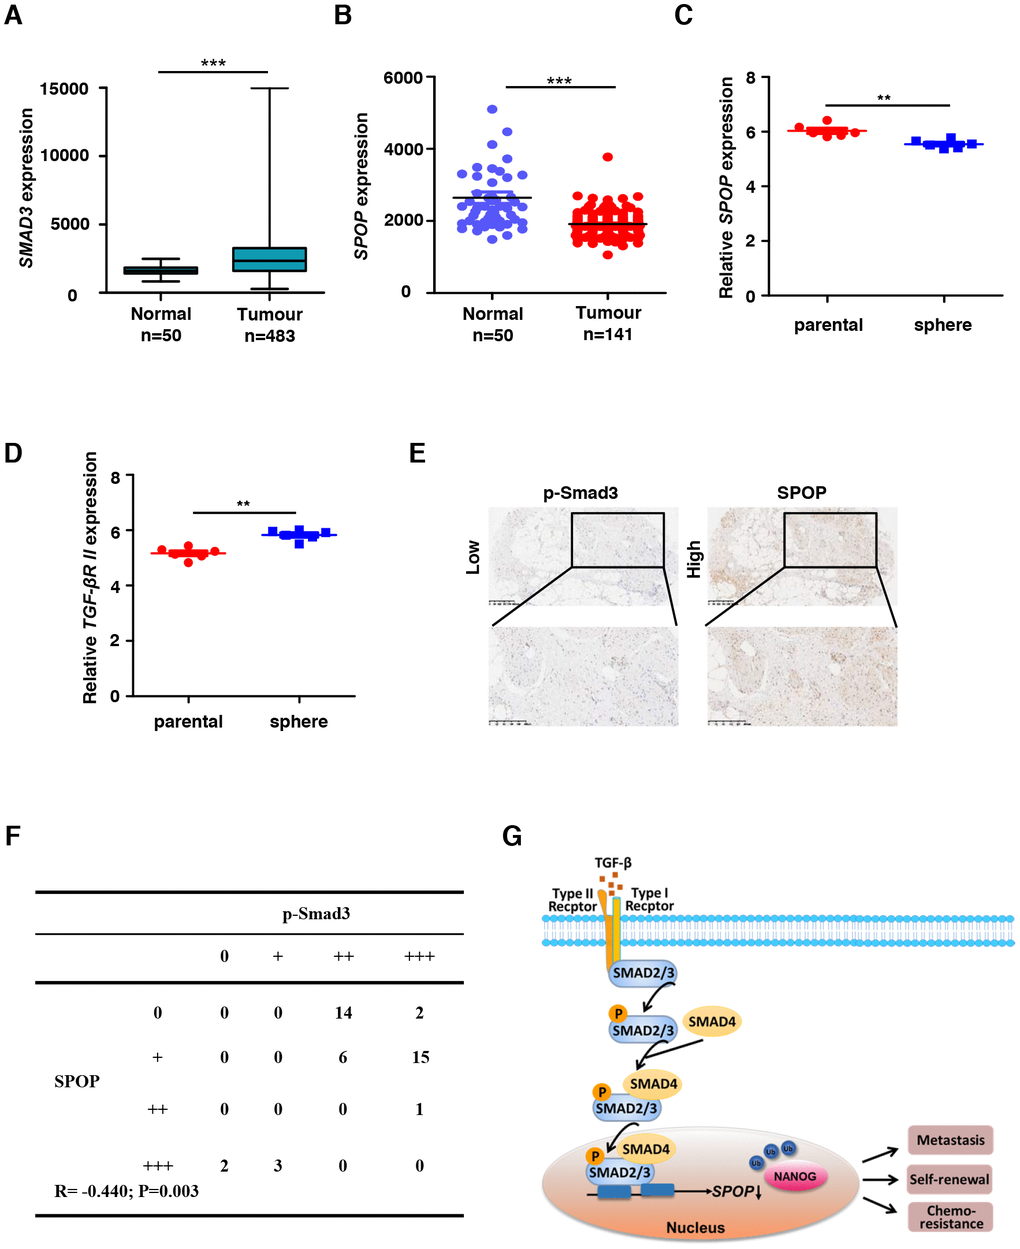 SPOP expression is downregulated in human proatate cancer. (A) SMAD3 expression levels in normal tissue and primary tumor of prostate through the TCGA data. Expression levels are presented as boxplots and were compared using an unpaired Student's t-test, ***PB) SPOP expression levels in normal tissue and primary tumor of prostate through the TCGA data. Expression levels are presented as boxplots and were compared using an unpaired Student's t-test, ***PC) Relative SPOP expression levels in parental sample and sphere sample of prostate cancer through the GEO data GSE19713. Expression levels are presented as boxplots and were compared using an unpaired Student's t-test, **PD) Relative TGFβR II expression levels in parental sample and sphere sample of prostate cancer through the GEO data GSE19713. Expression levels are presented as boxplots and were compared using an unpaired Student's t-test, **PE) Human prostate tumor specimens were stained with p-SMAD3 and SPOP separately using an IHC staining assay. Representative examples are shown. (F) The correlation between SPOP and p-SMAD3 protein levels in the human prostate tumor tissue array is shown. Statistical significance was determined by a χ2 test. R indicates the correlation coefficient. (G) Model for TGF-β signaling negatively regulates SPOP expression.